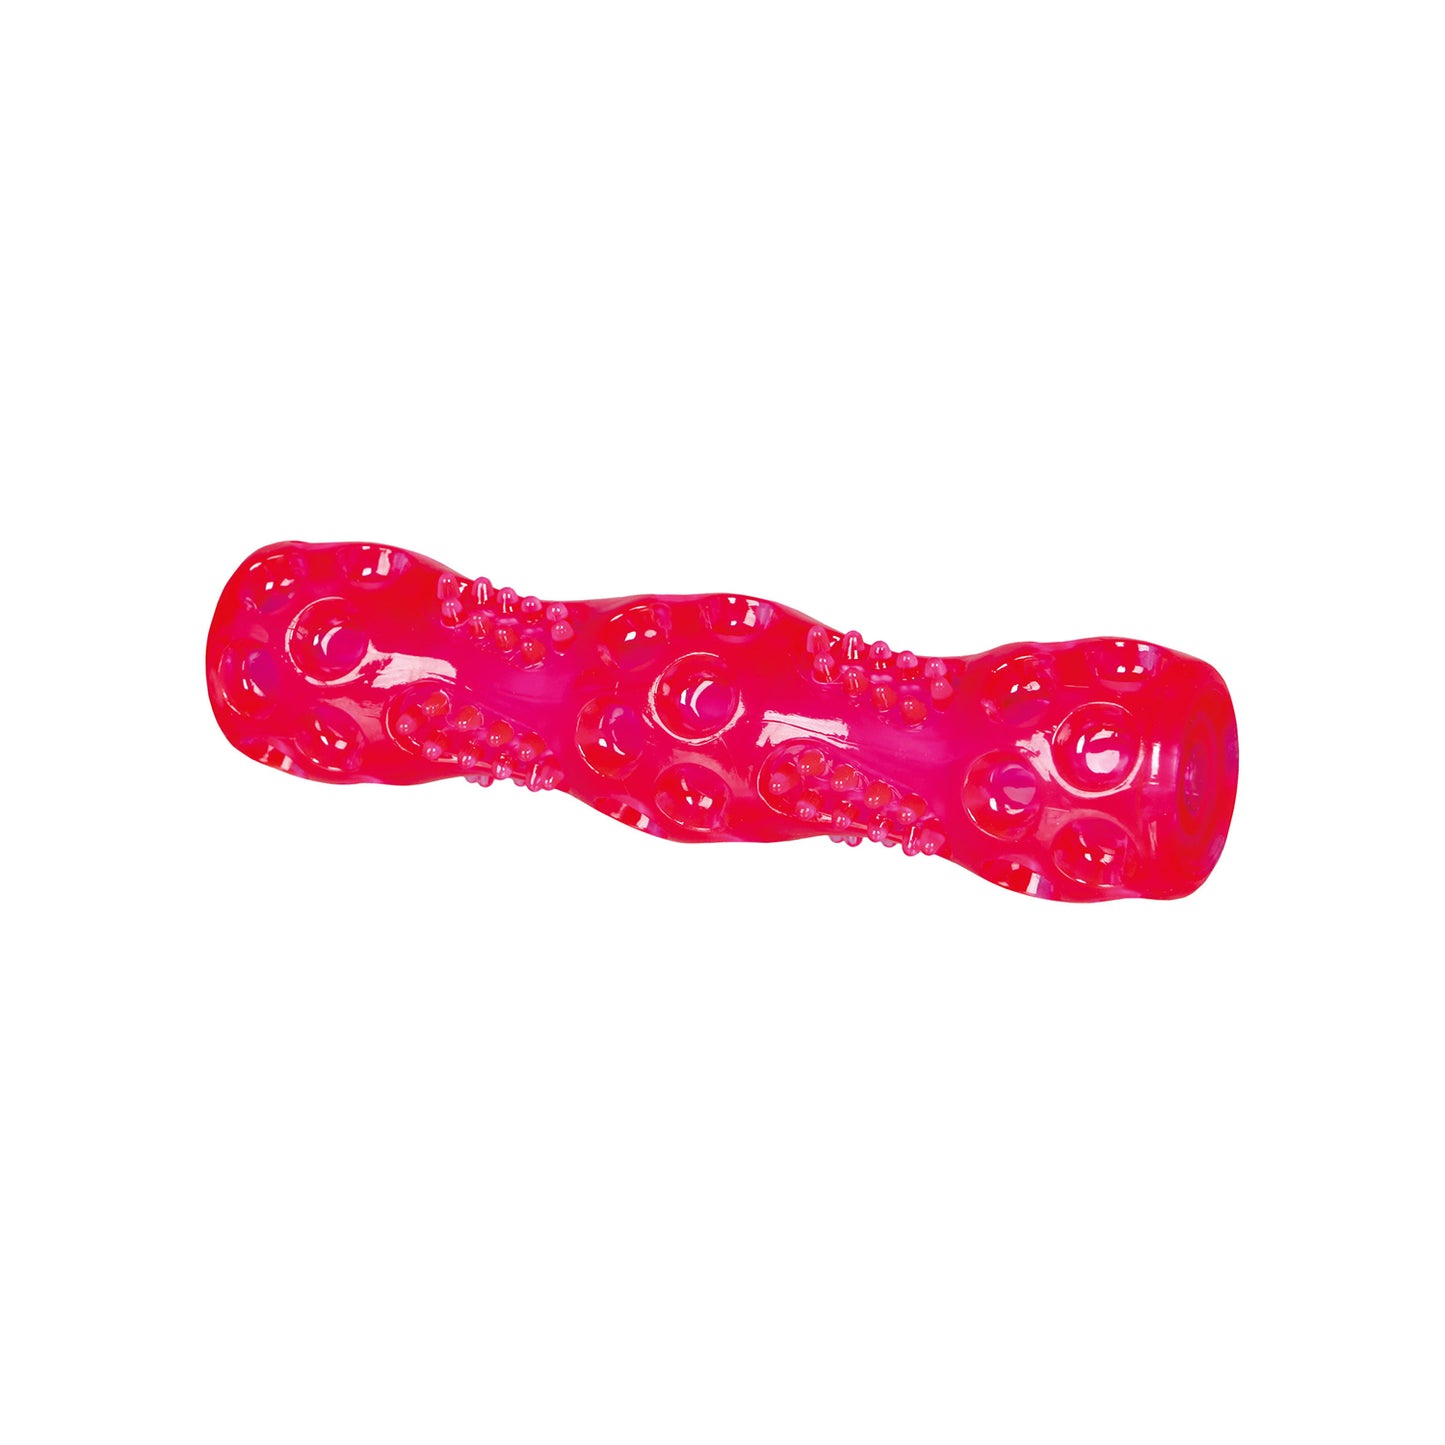 Trixie - Stick Thermoplatic Rubber Toy